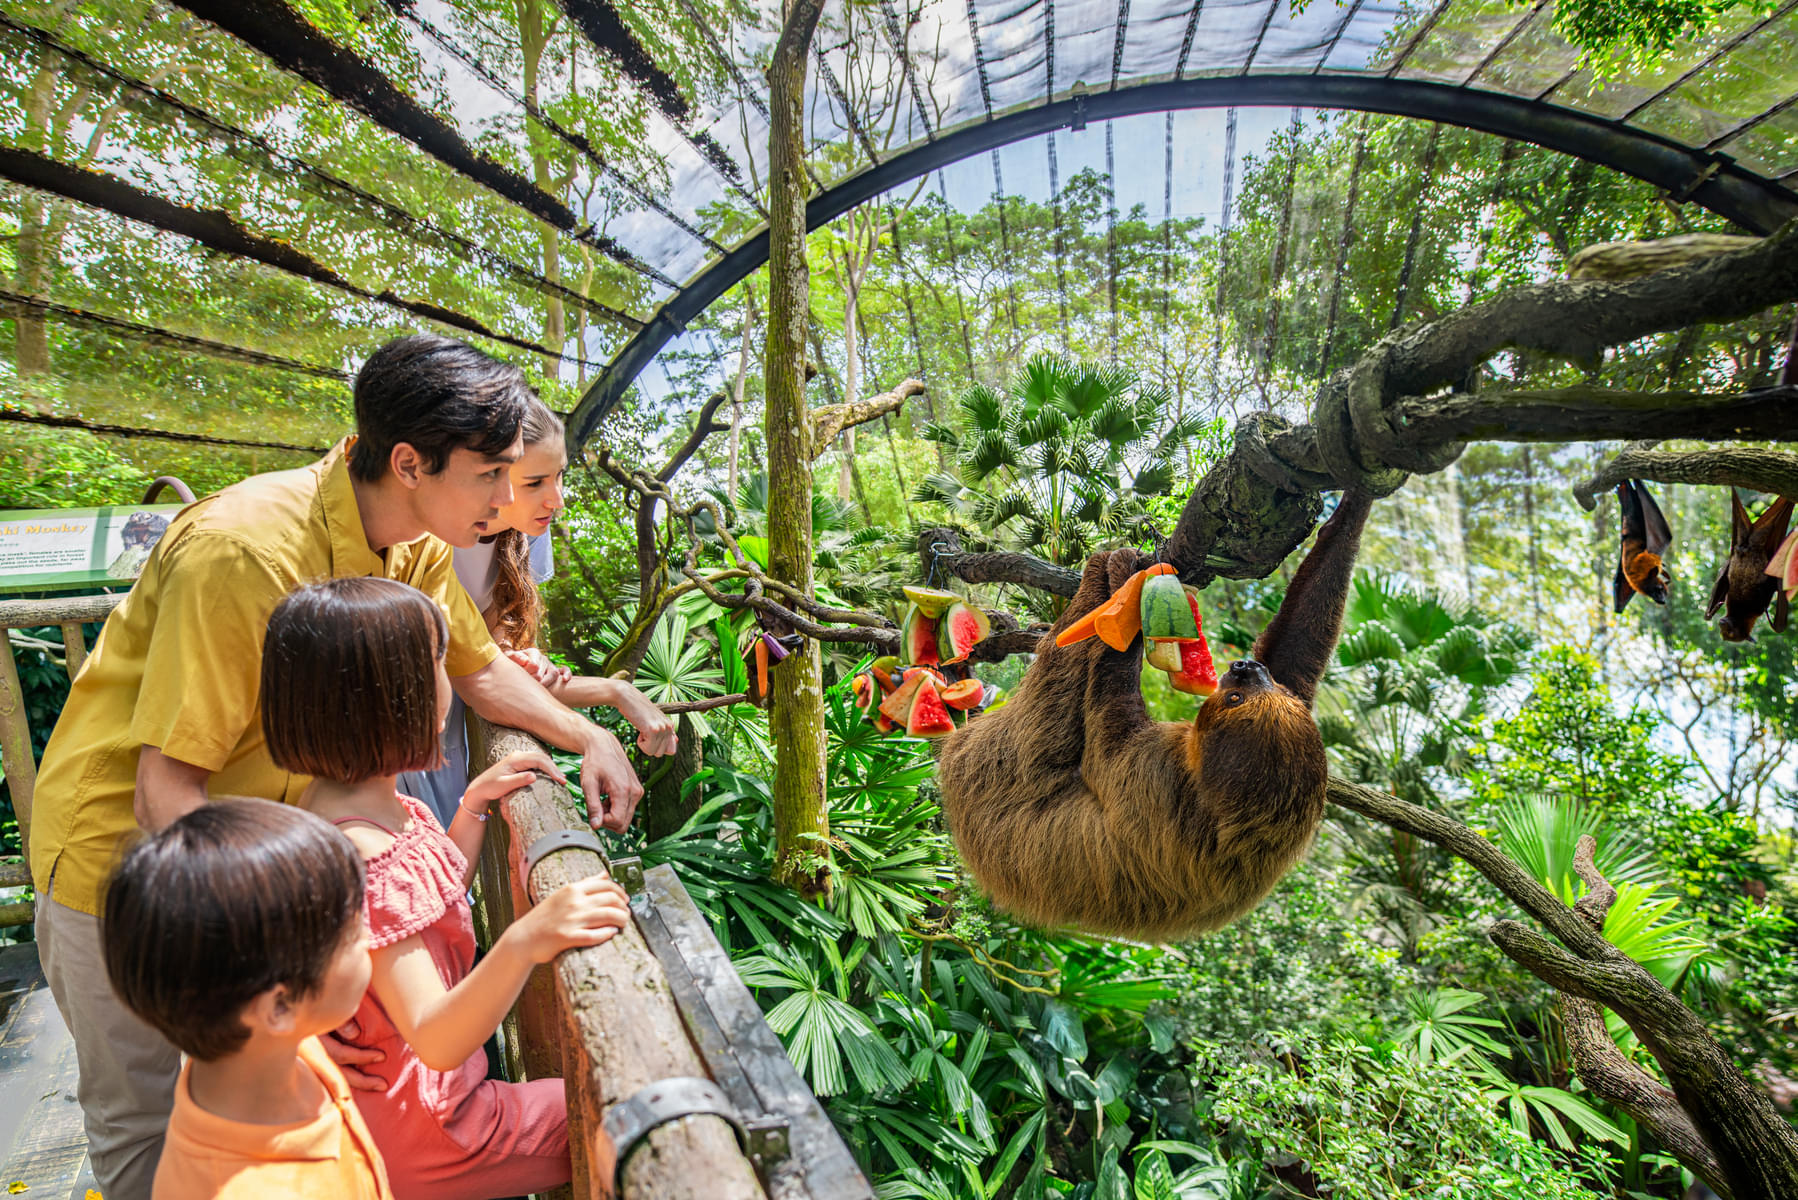 Visit the Singapore Zoo that houses more than 300 species